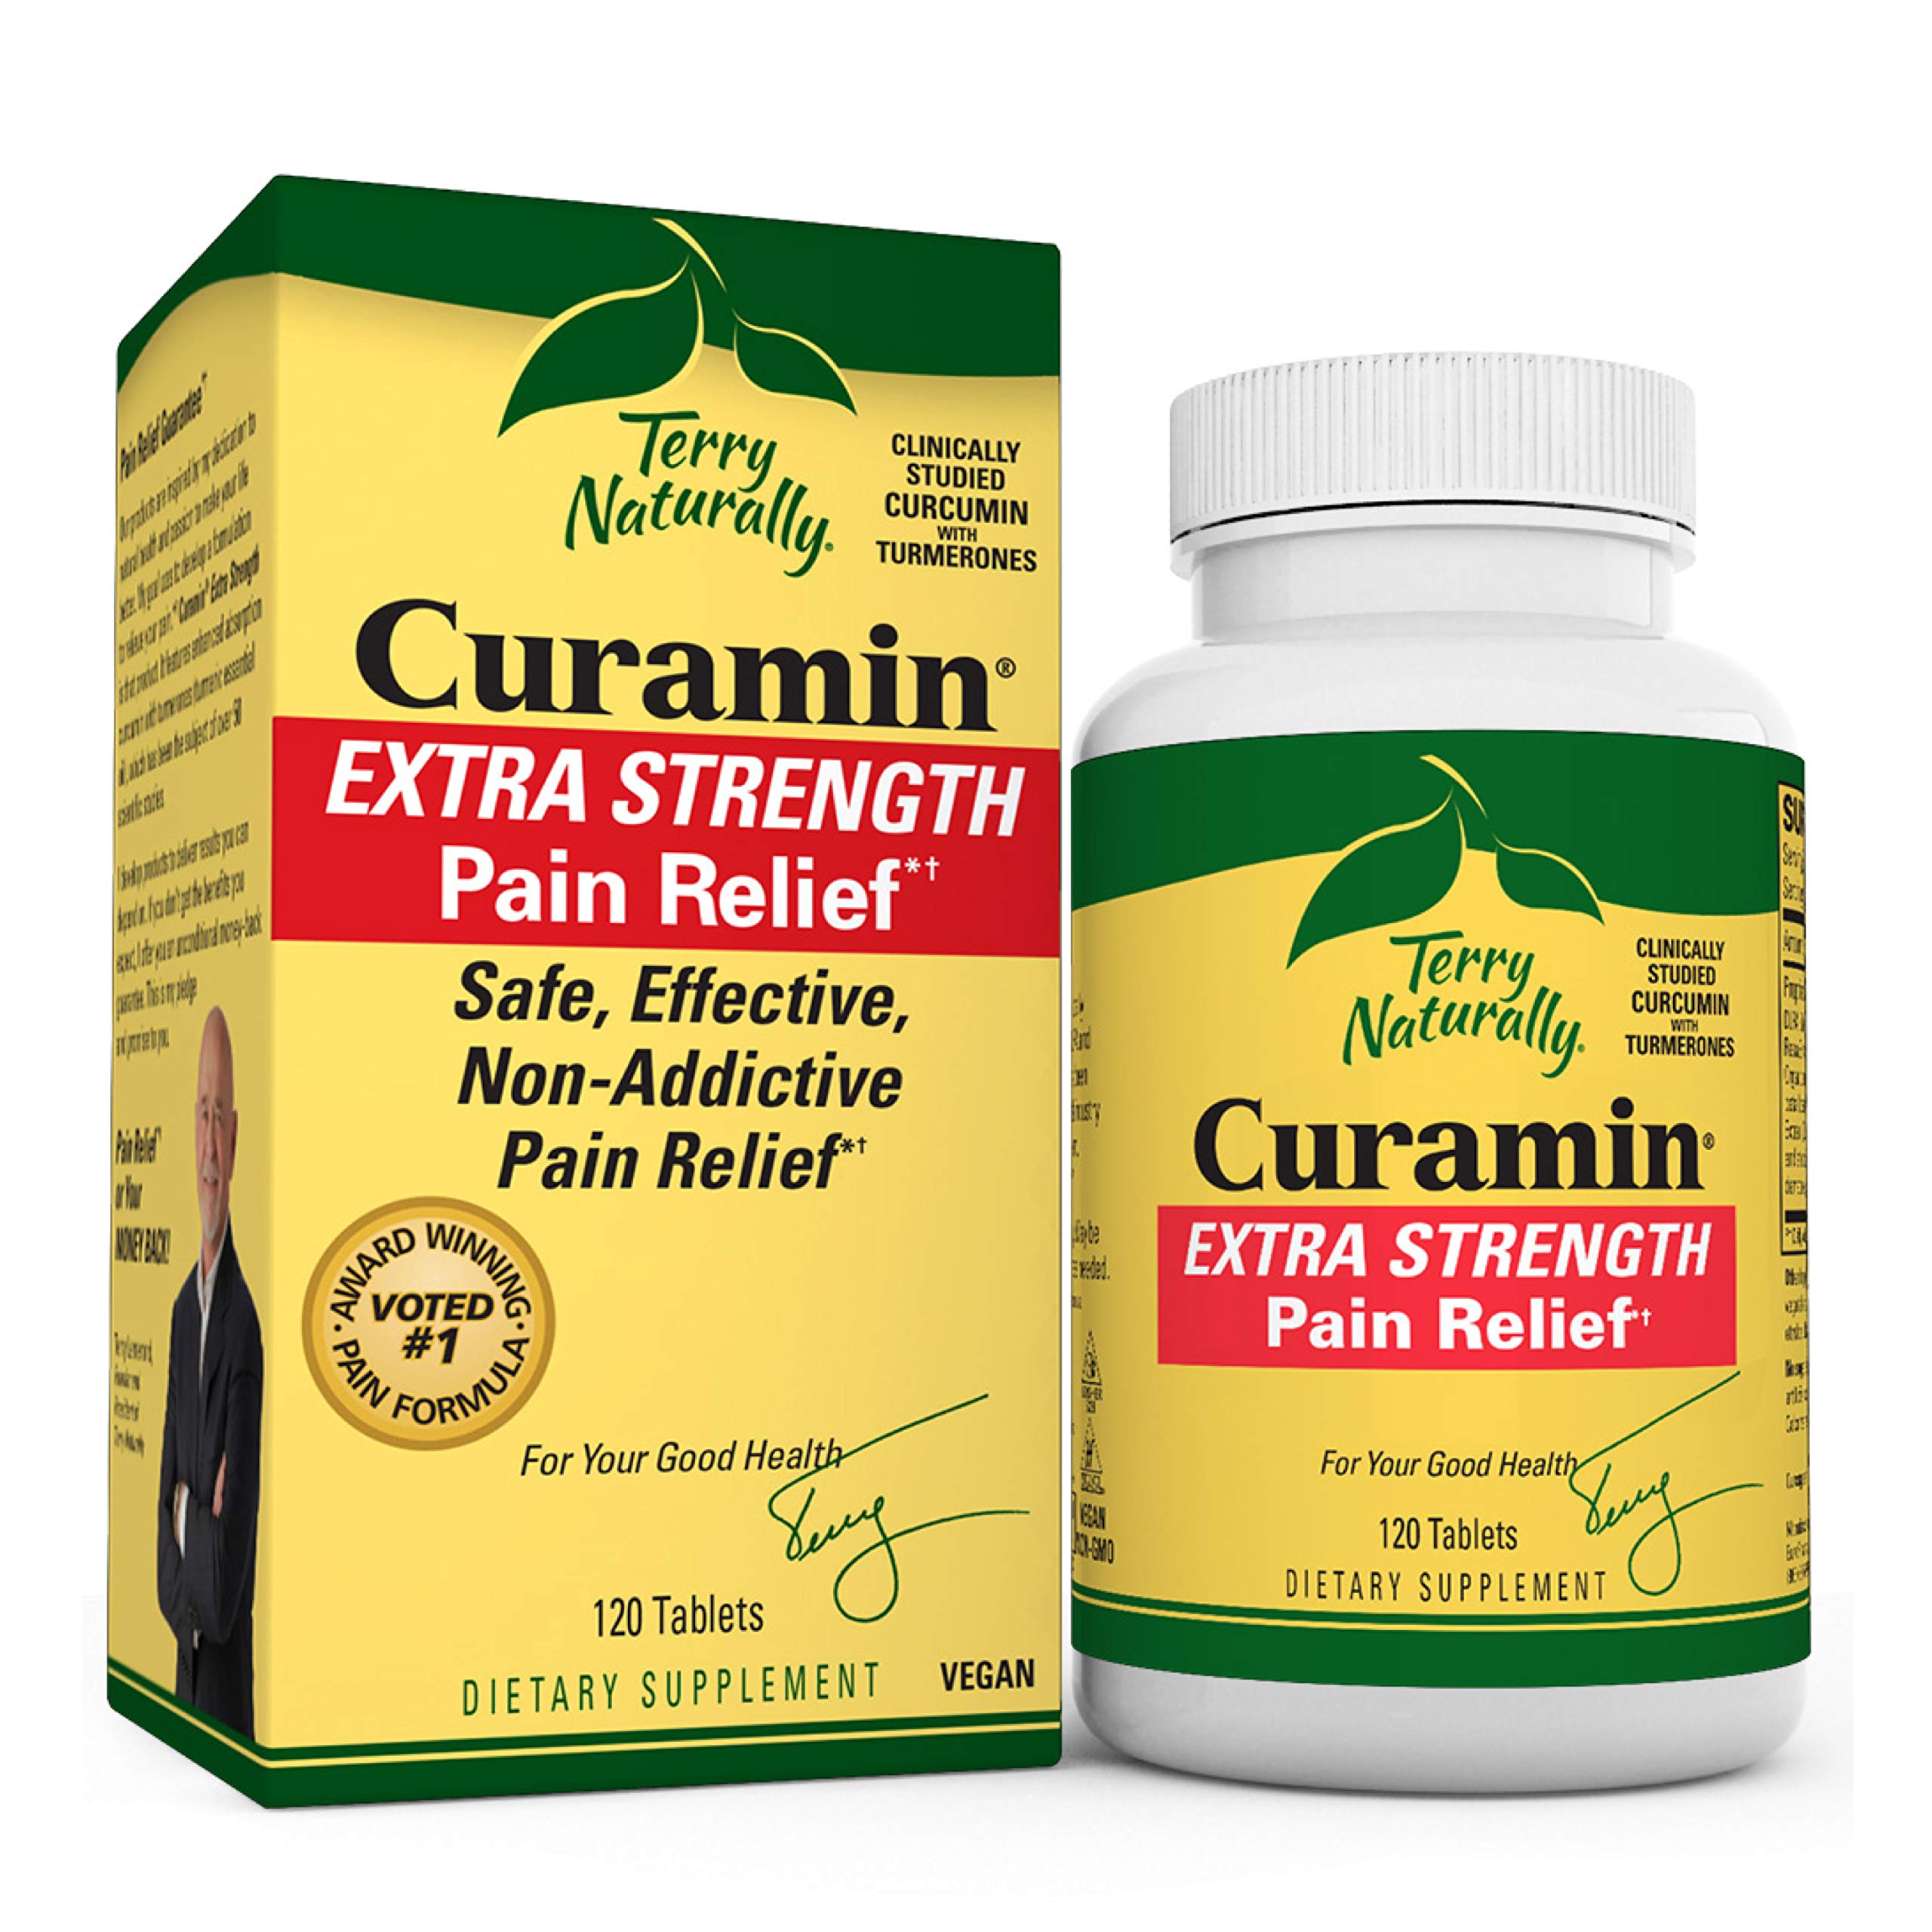 Terry Naturally Curamin Extra Strength - 120 Vegan Tablets - Non-Addictive Pain Relief Supplement with Curcumin from Turmeric, Boswellia & DLPA - N...